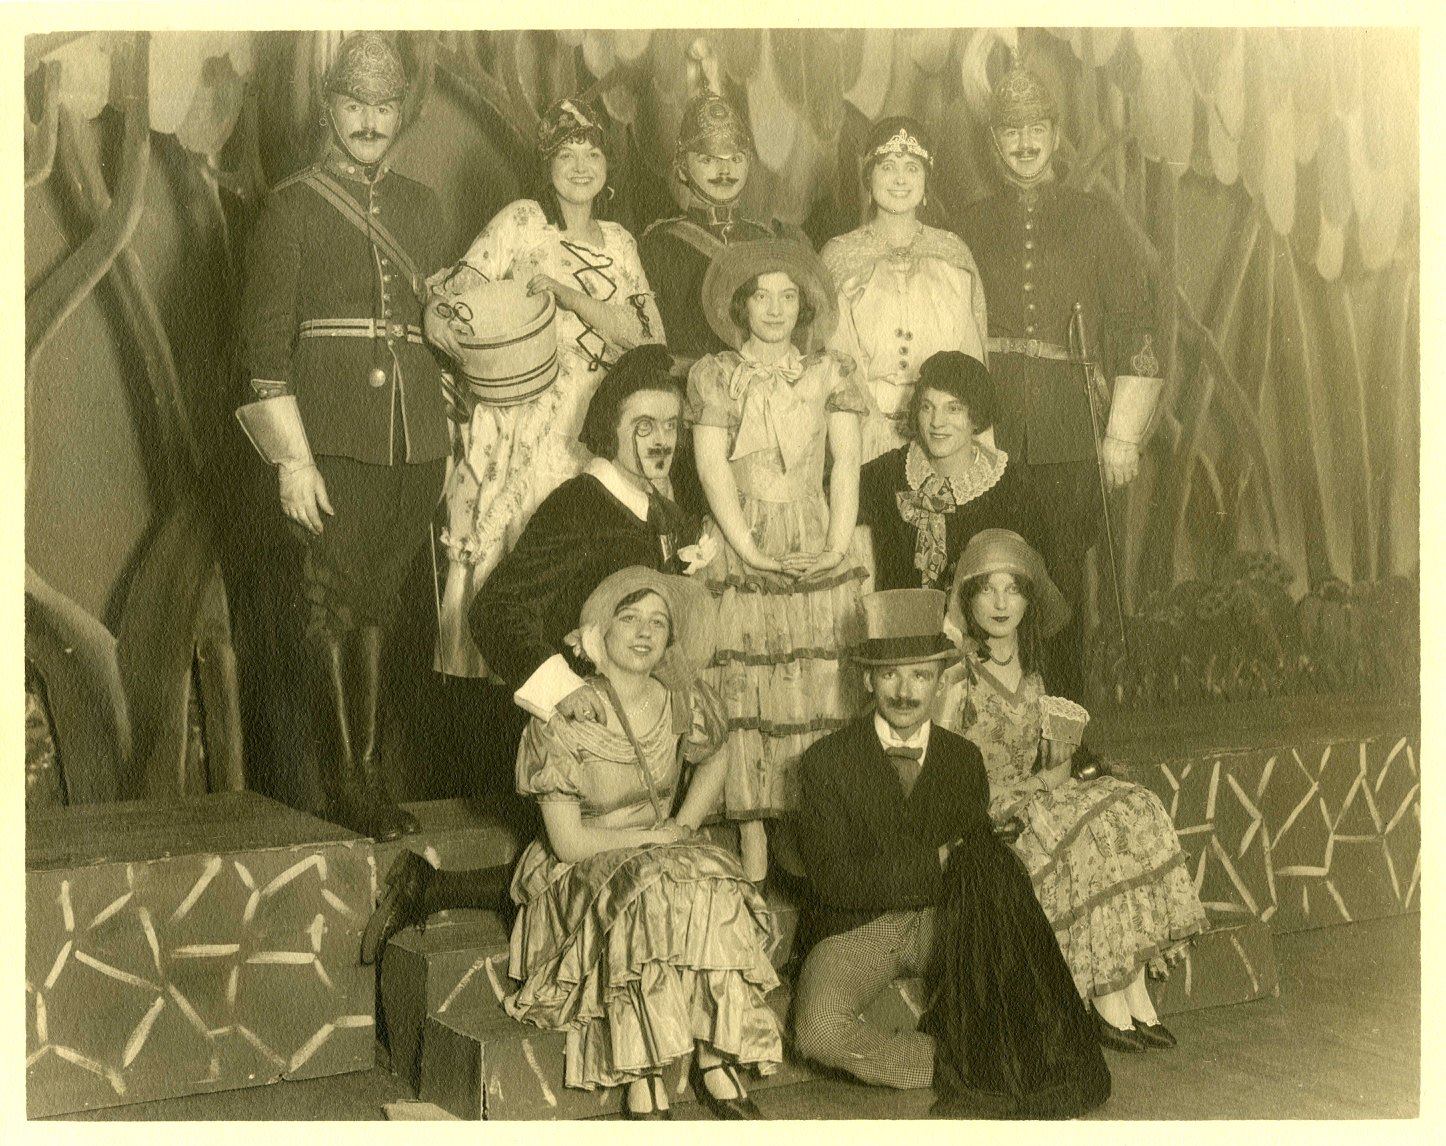 A photograph of the principal actors from the University of Manitoba theatre production of 'Patience' in 1930. Eleven unidentified actors are visible, in costume.<br />
Source: University Relations & Information Office fonds